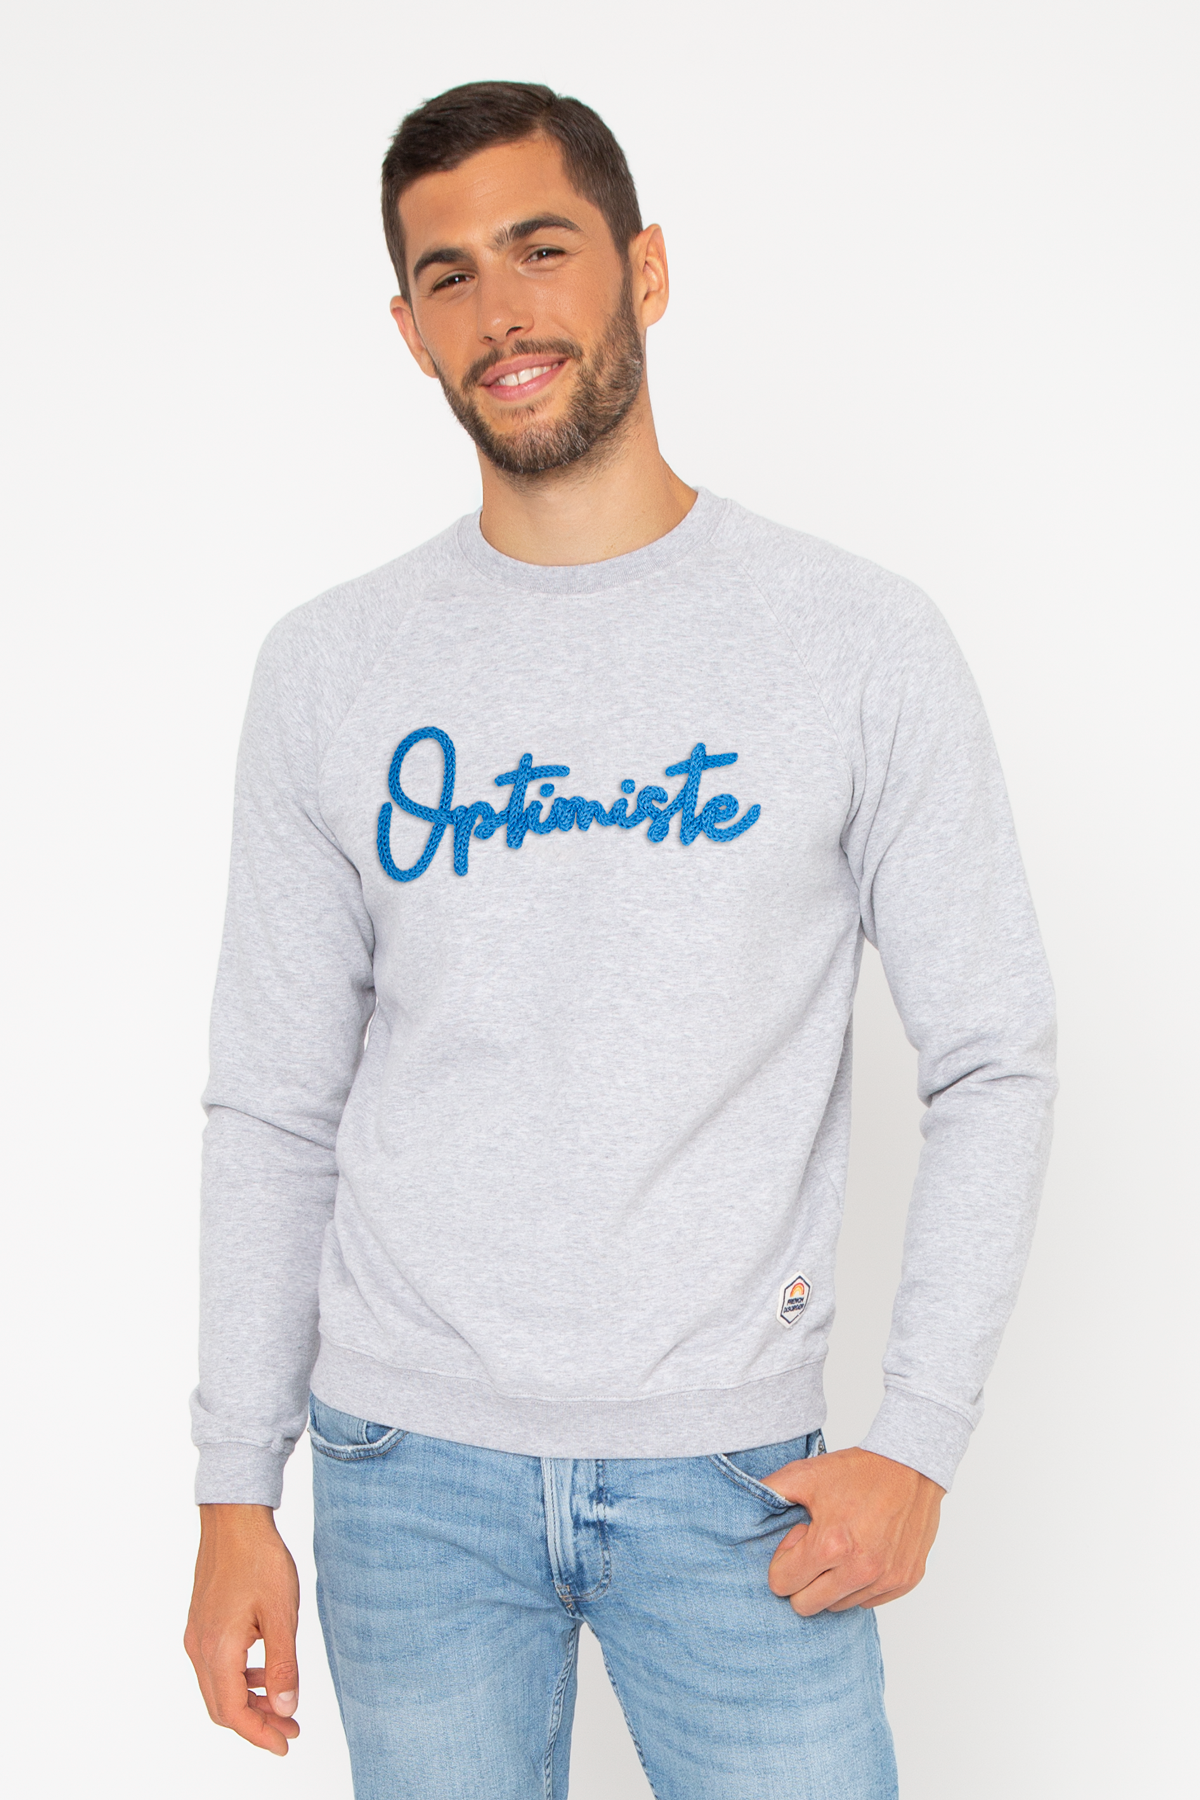 Sweat Clyde OPTIMISTE (tricotin)